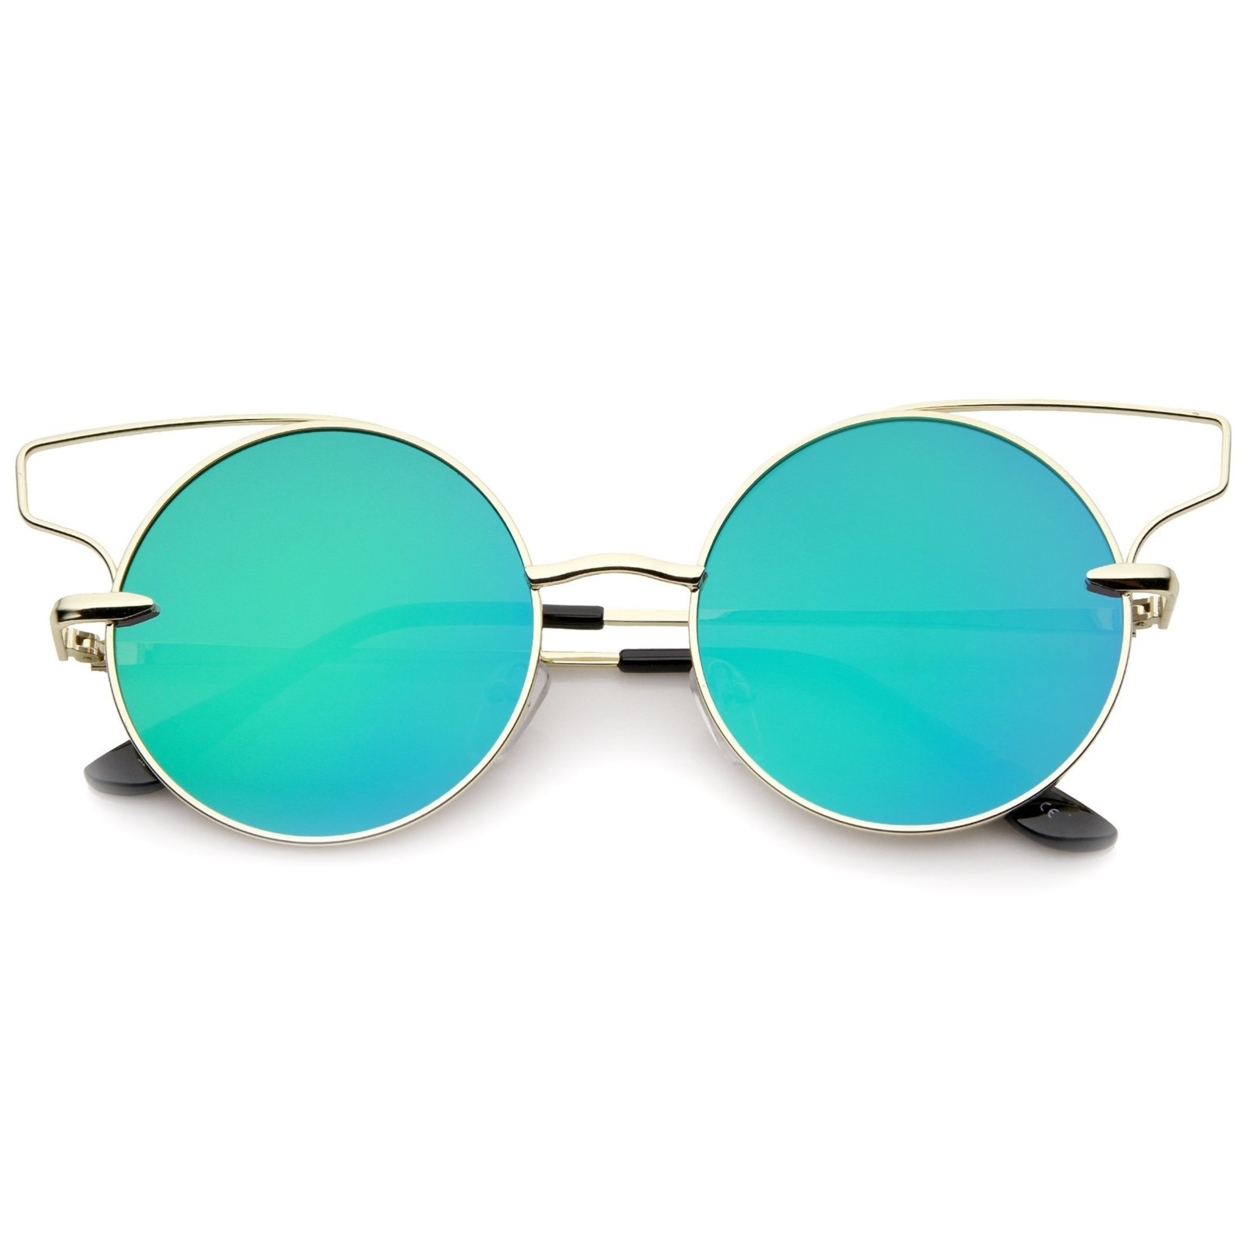 Women's Wire Open Metal Frame Color Mirror Flat Lens Round Cat Eye Sunglasses 52mm - Gold / Blue Mirror